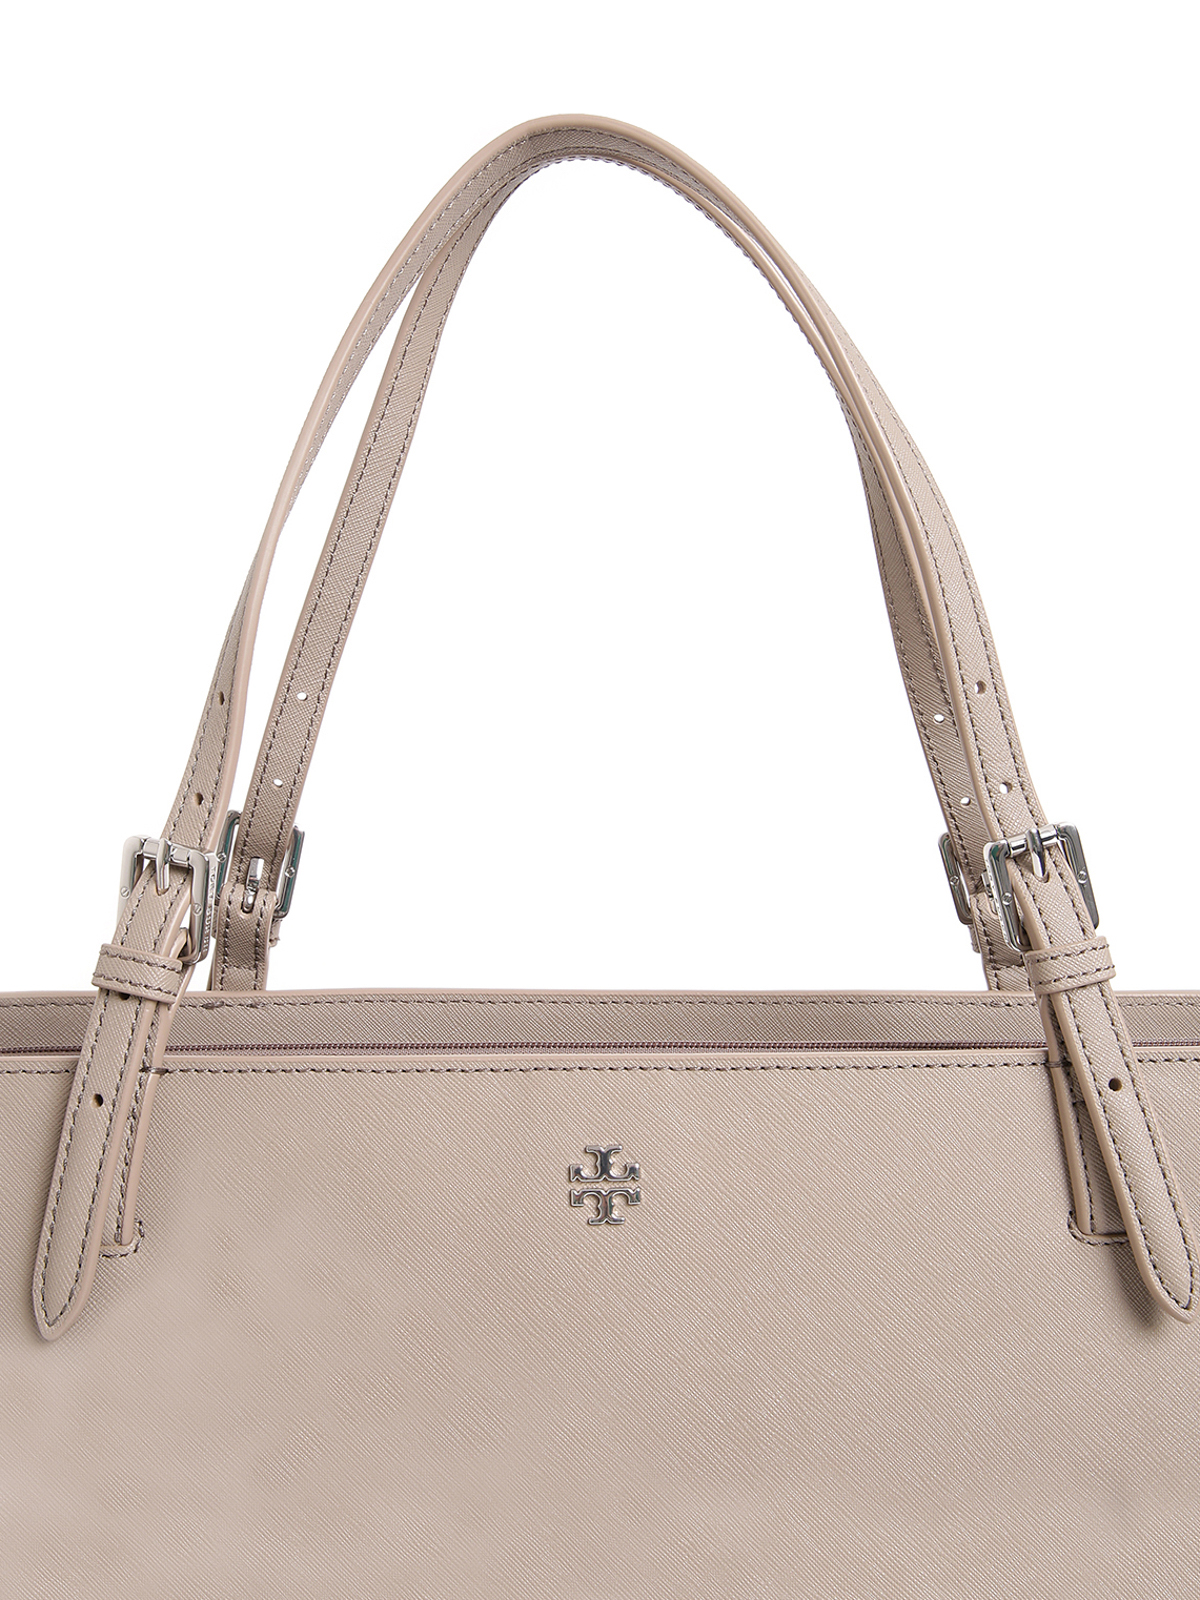 Tory+Burch+Small+York+Saffiano+Leather+Buckle+Tote+Black for sale online